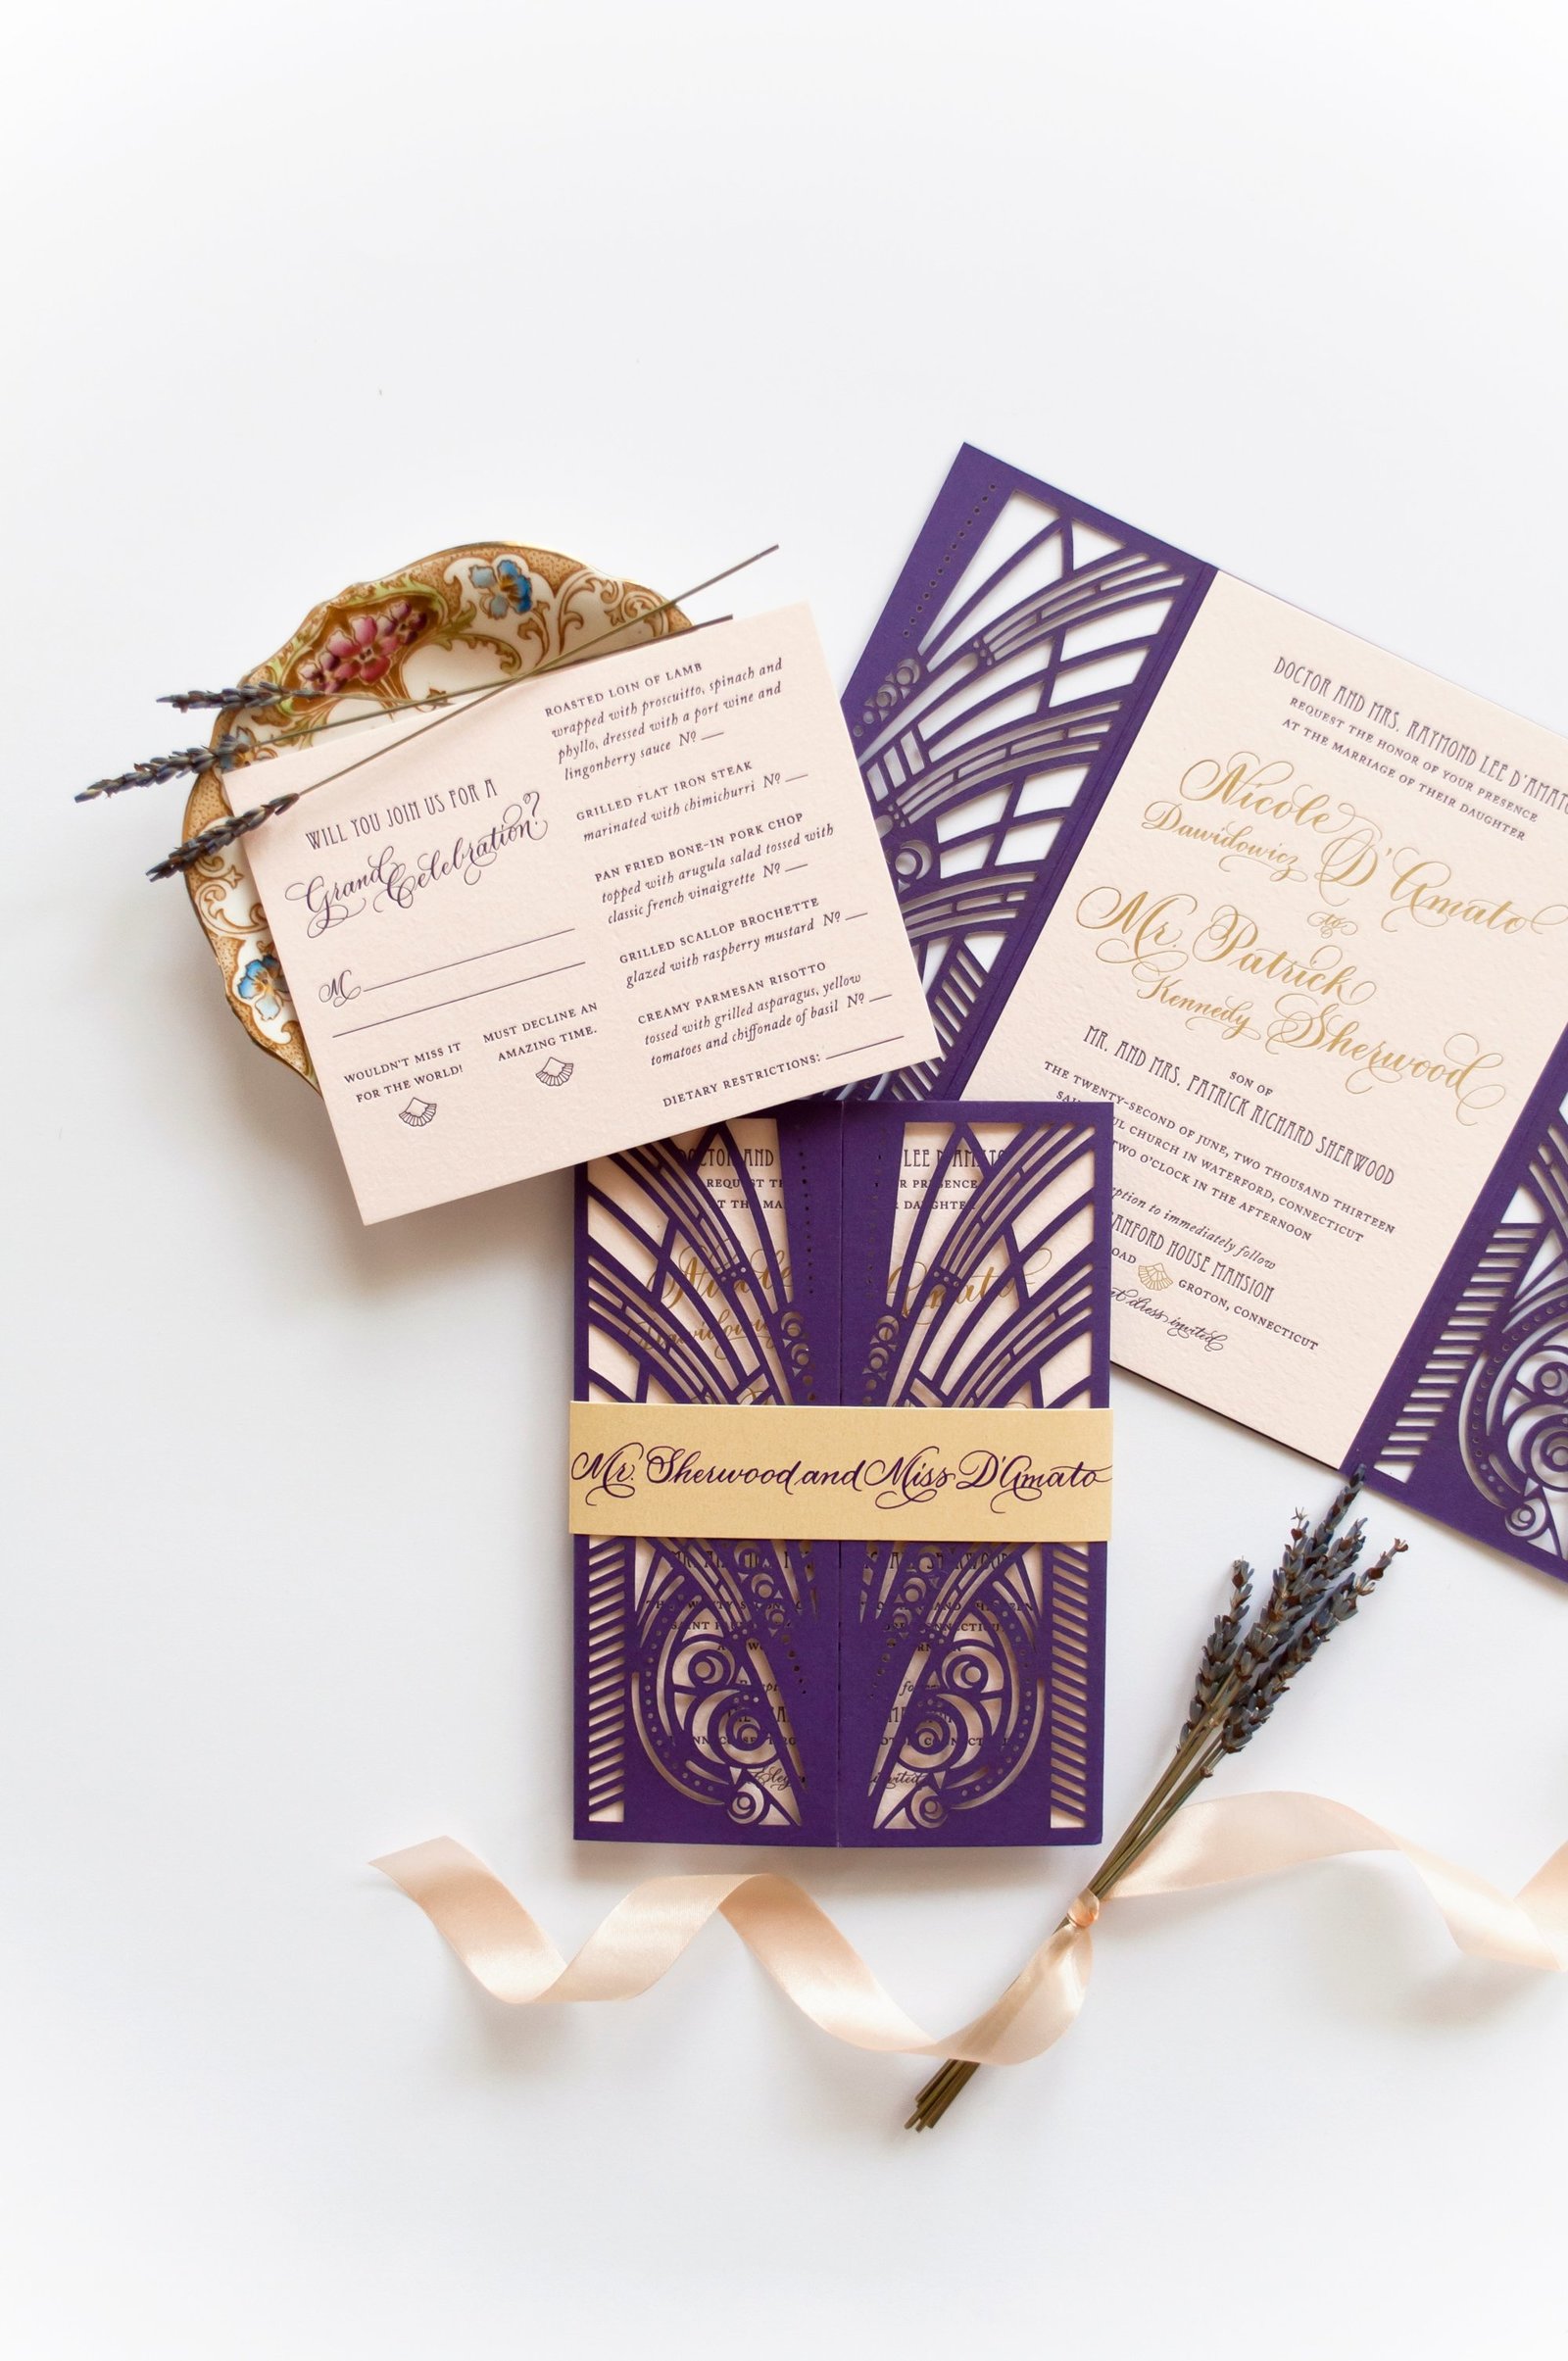 Luxurious gatsby themed letterpress wedding invitations for wedding at The Branford House in Groton, CT